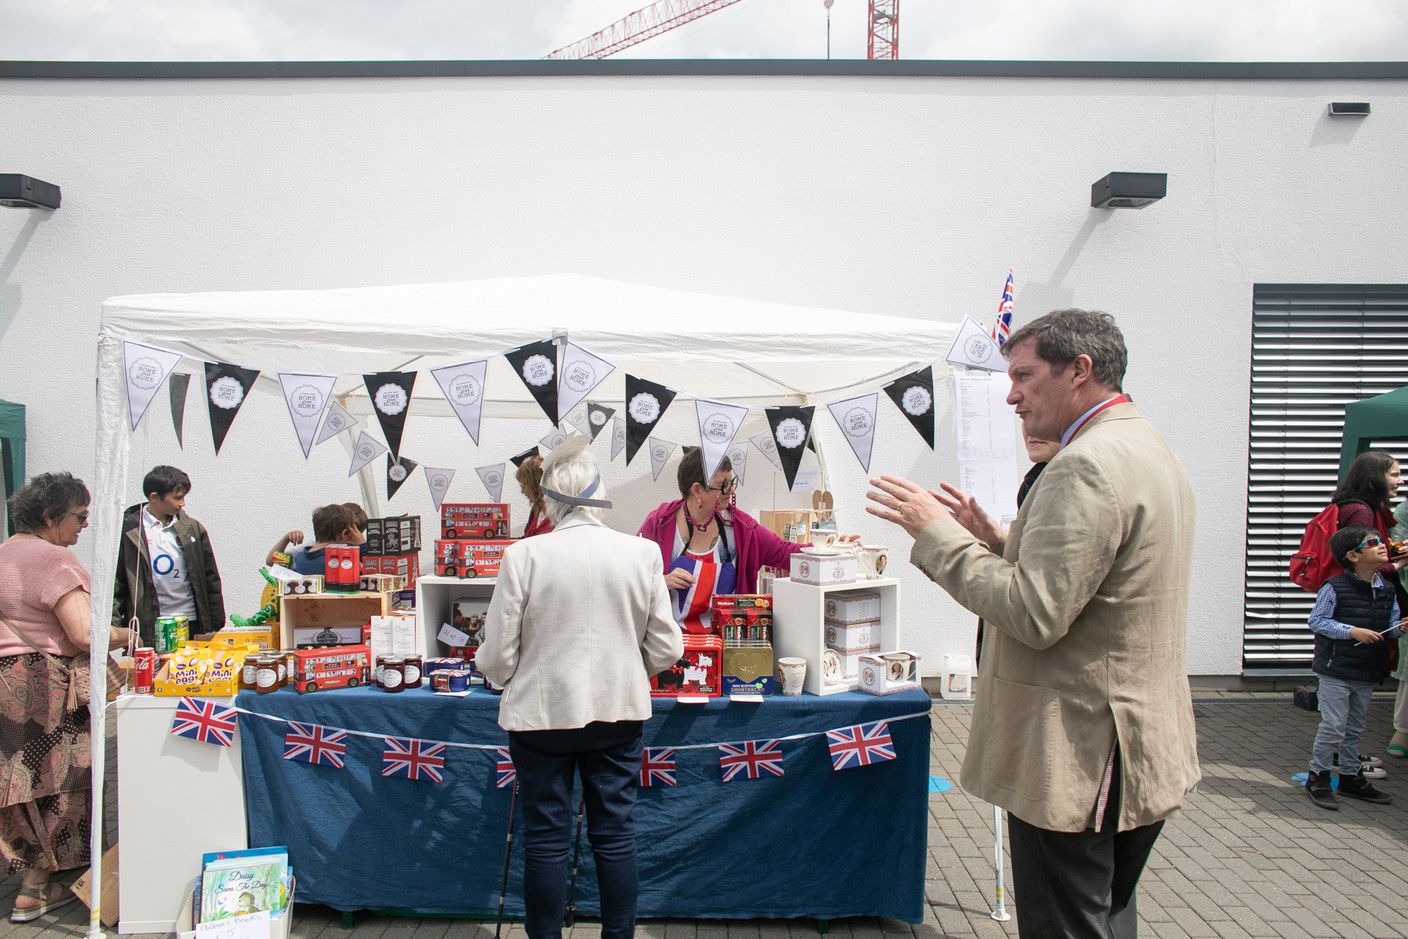 Stand offering British souvenirs during St George’s International School’s screening of the coronation of King Charles III and Queen Camilla. Photo: Matic Zorman / Maison Moderne